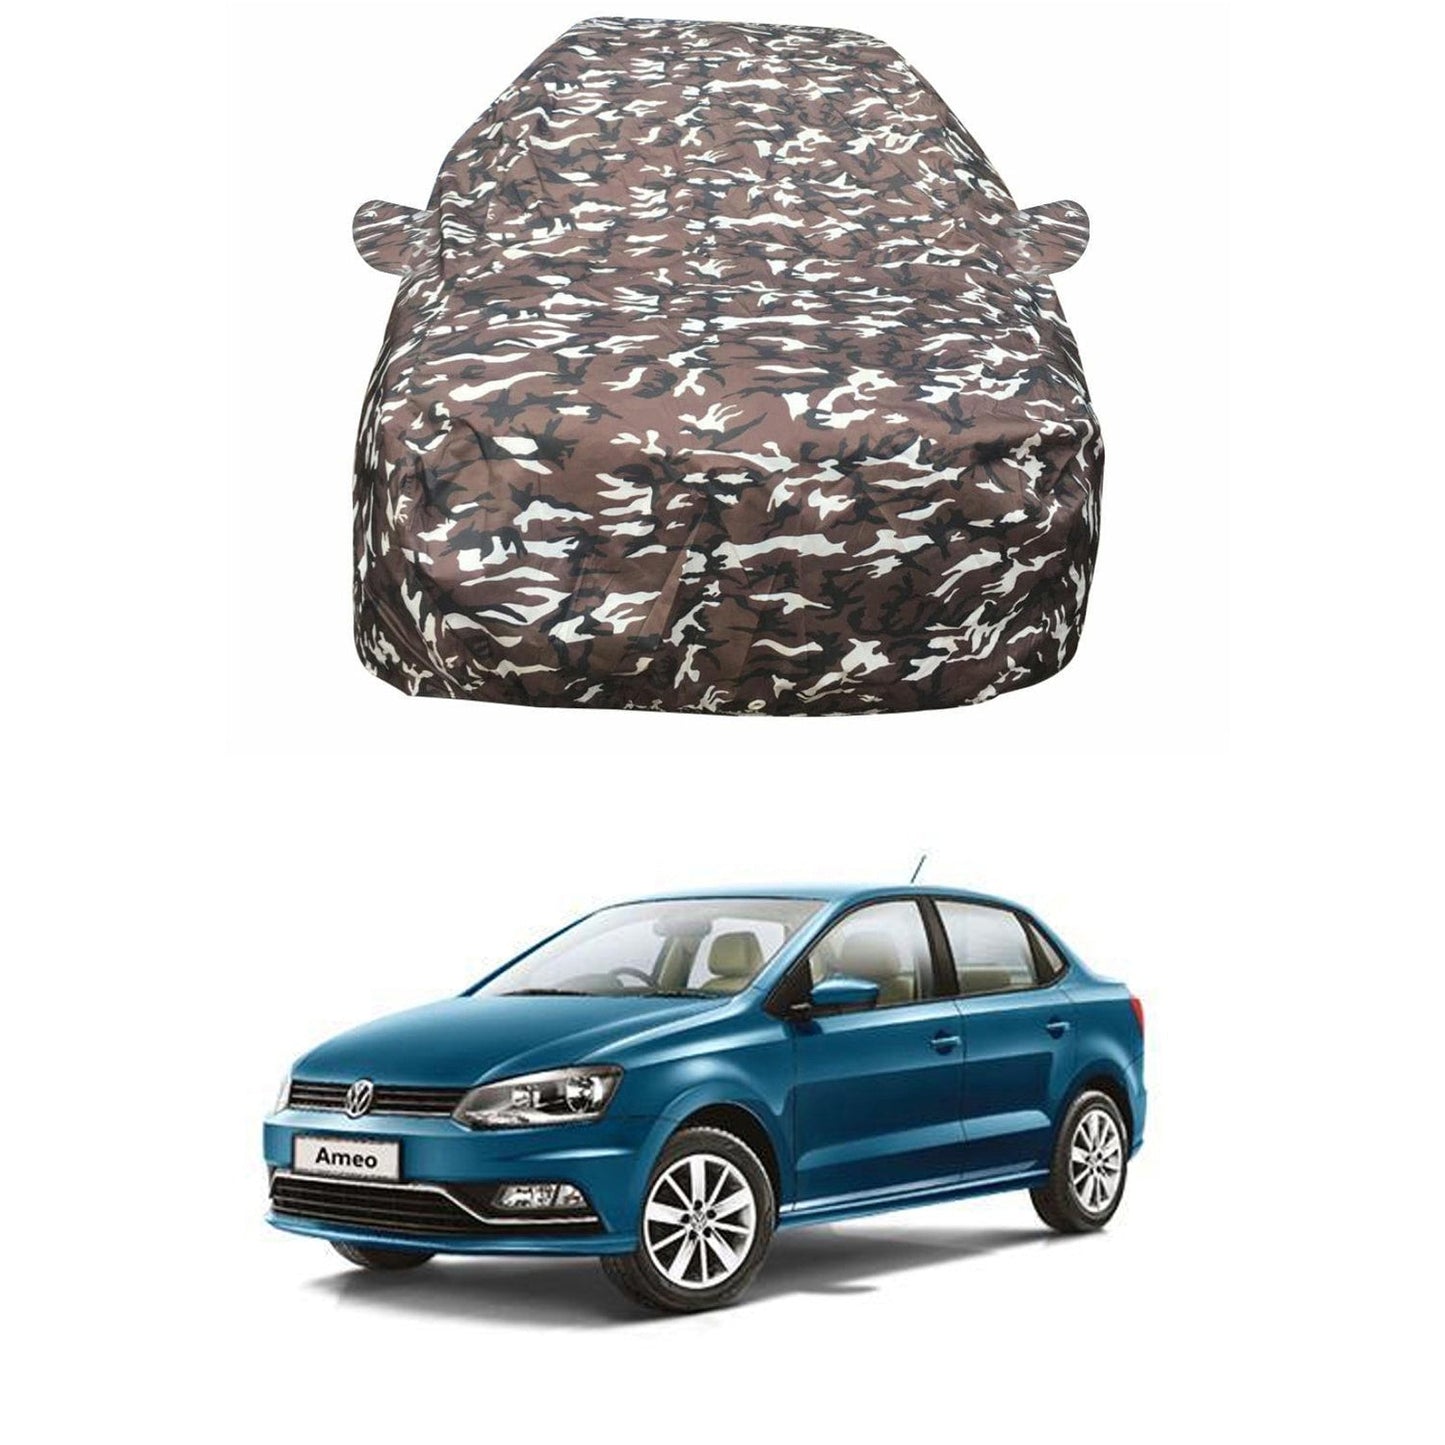 Oshotto Ranger Design Made of 100% Waterproof Fabric Multicolor Car Body Cover with Mirror Pockets For Volkswagen Ameo